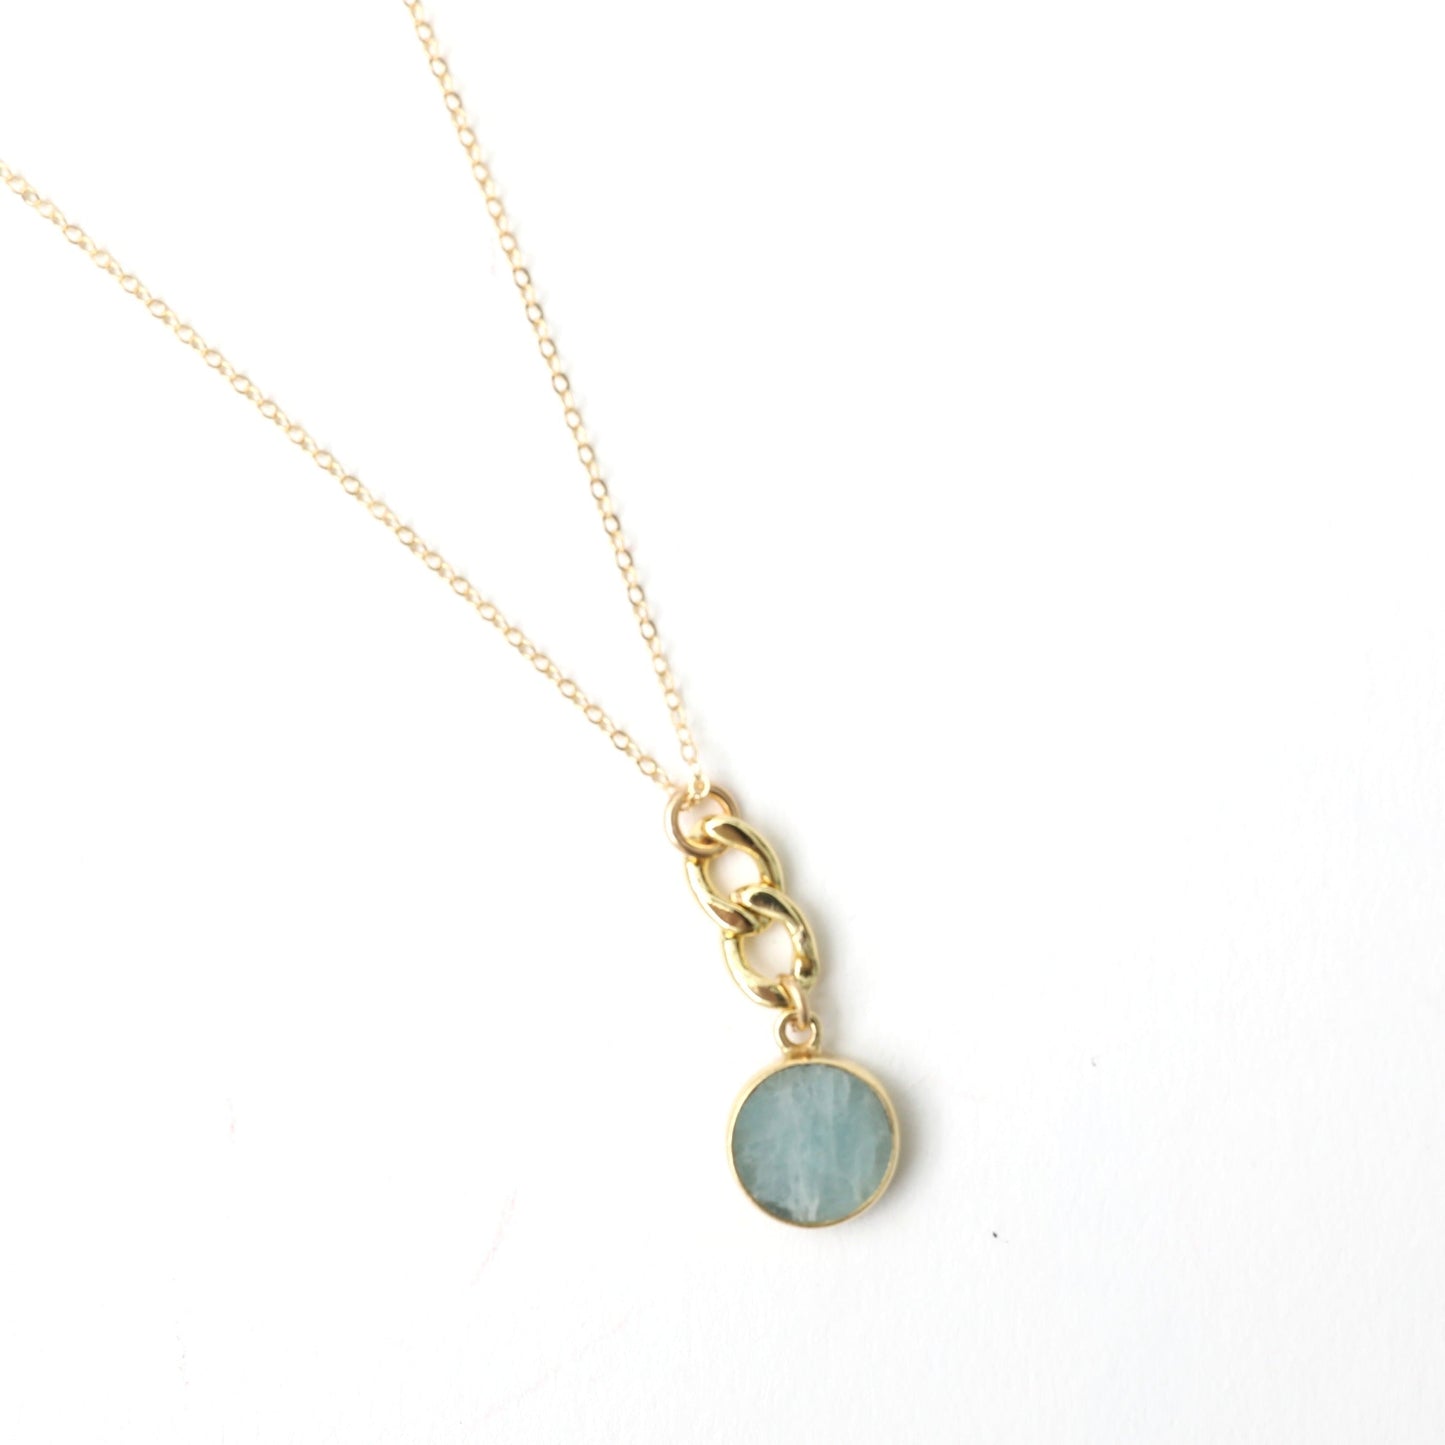 Cuban Chain Linked Gemstone Necklace